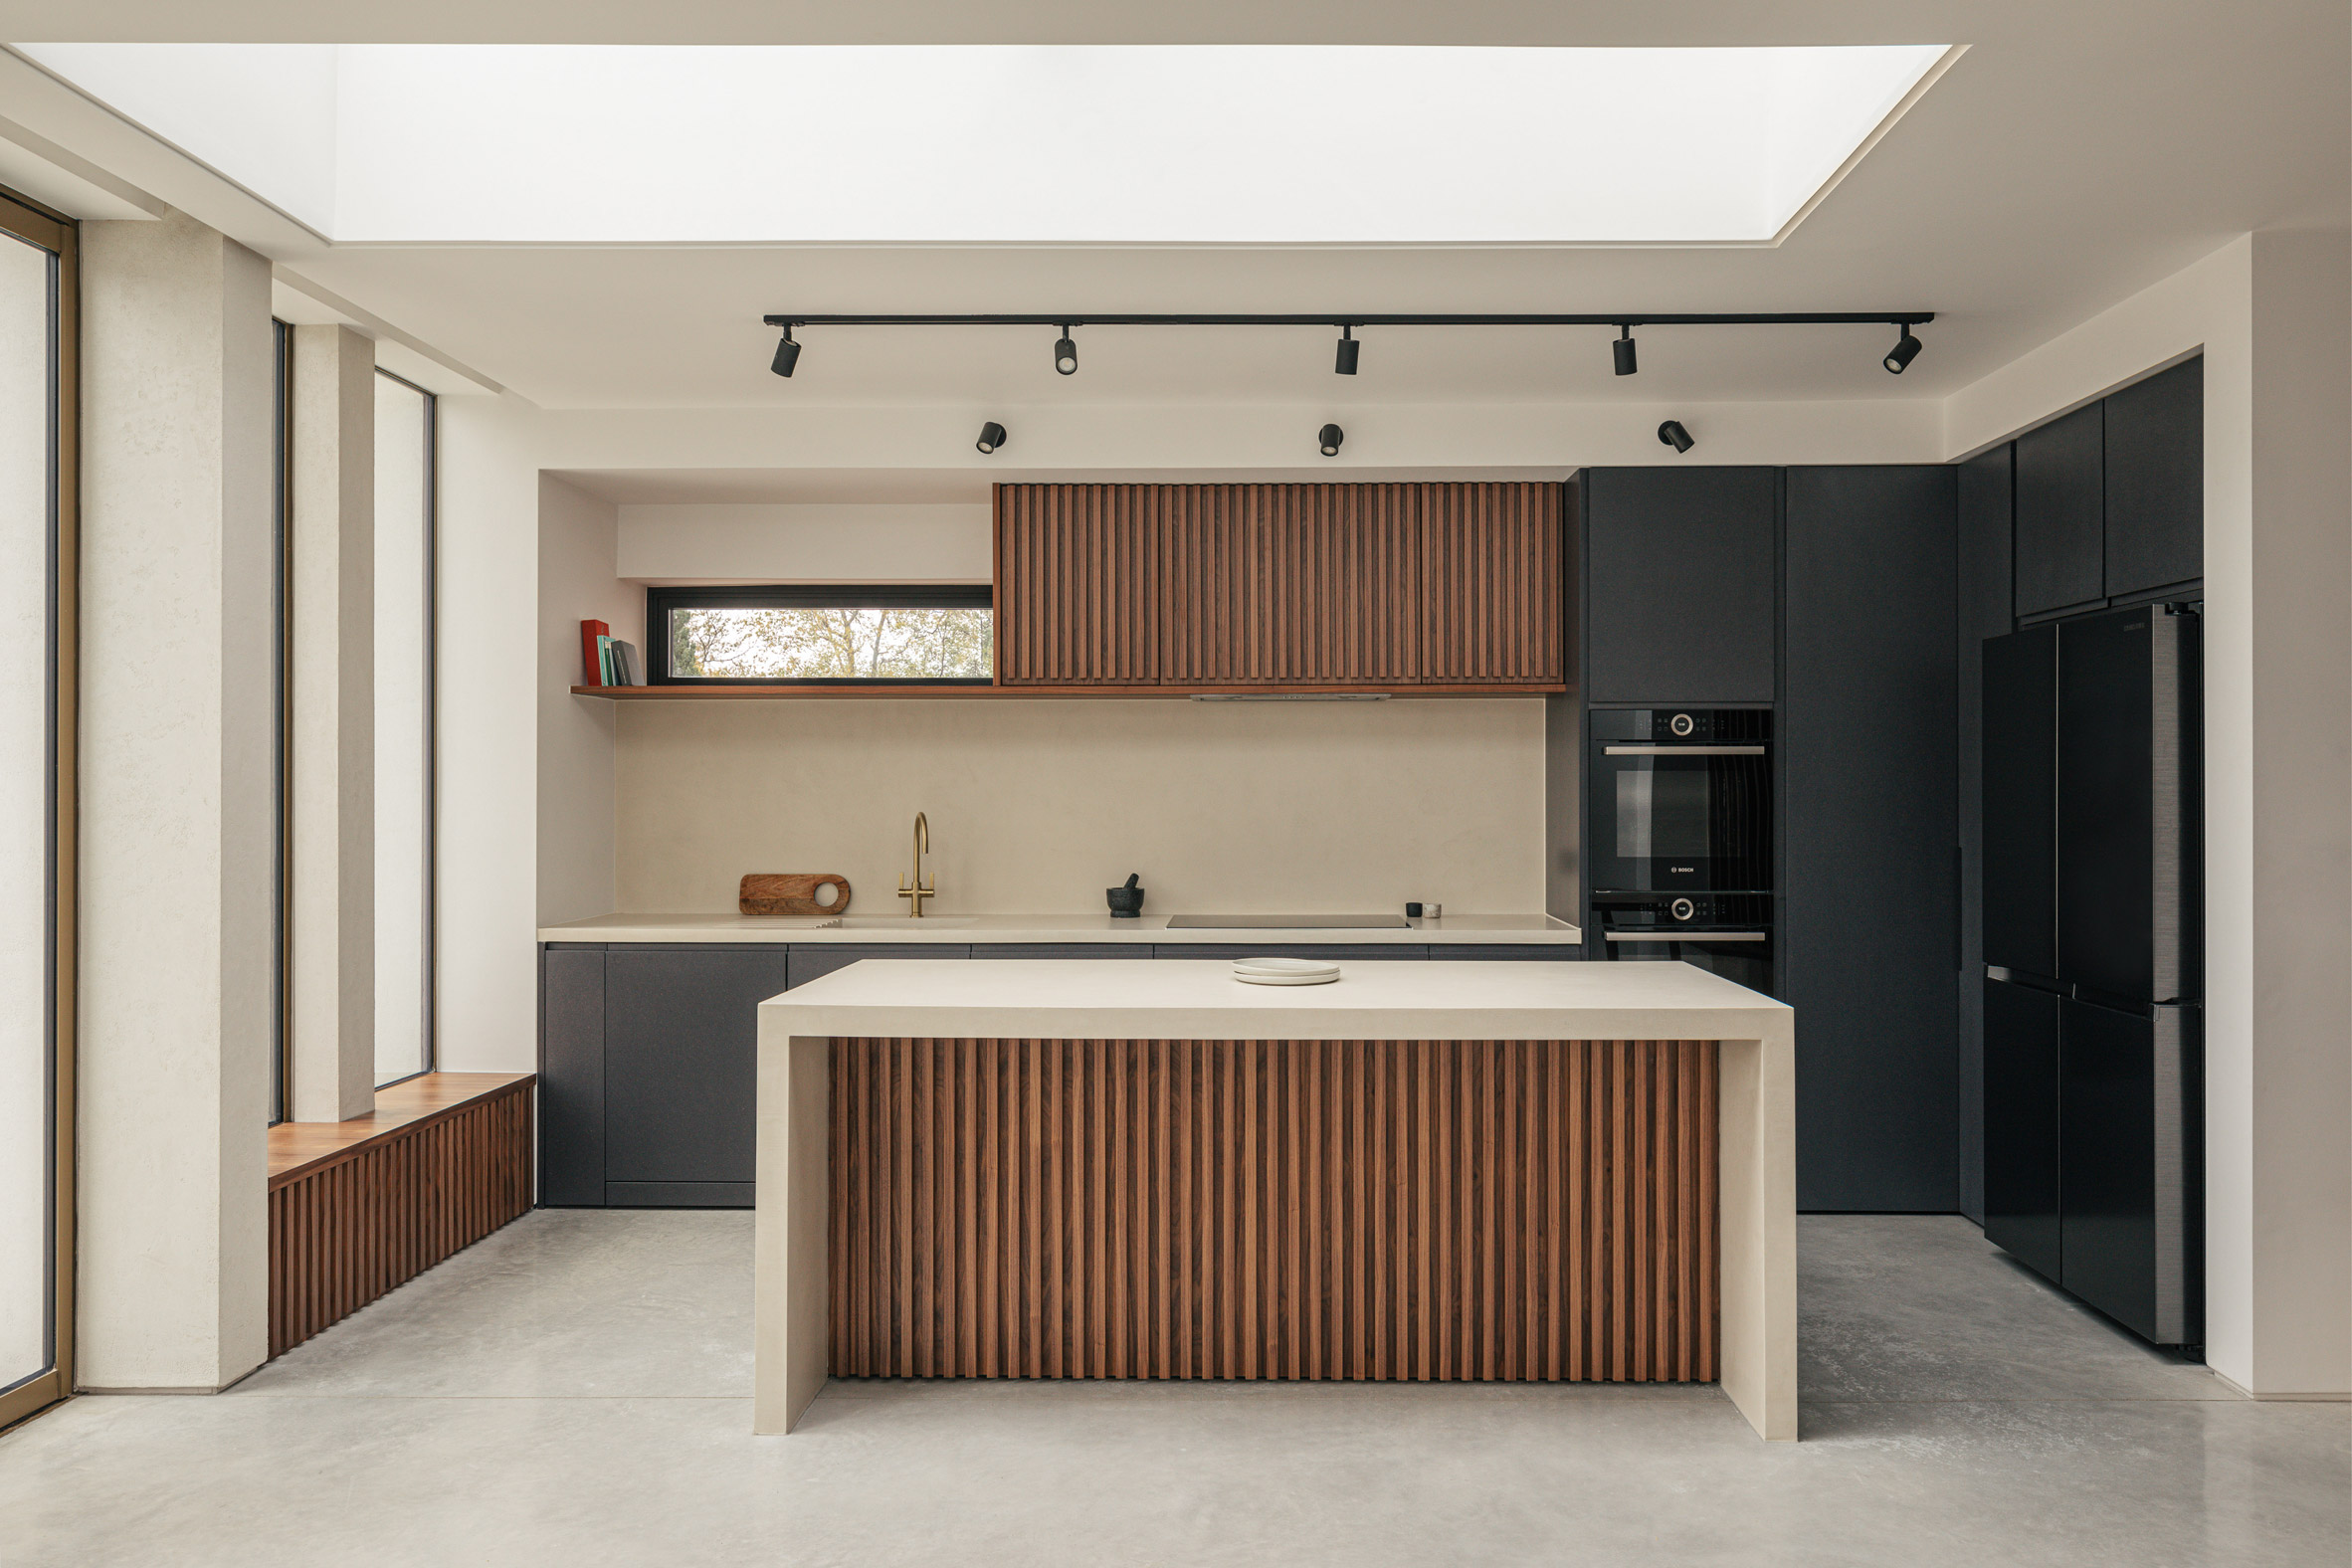 Kitchen in Colonnade by Will Gamble Architects in Croydon, London